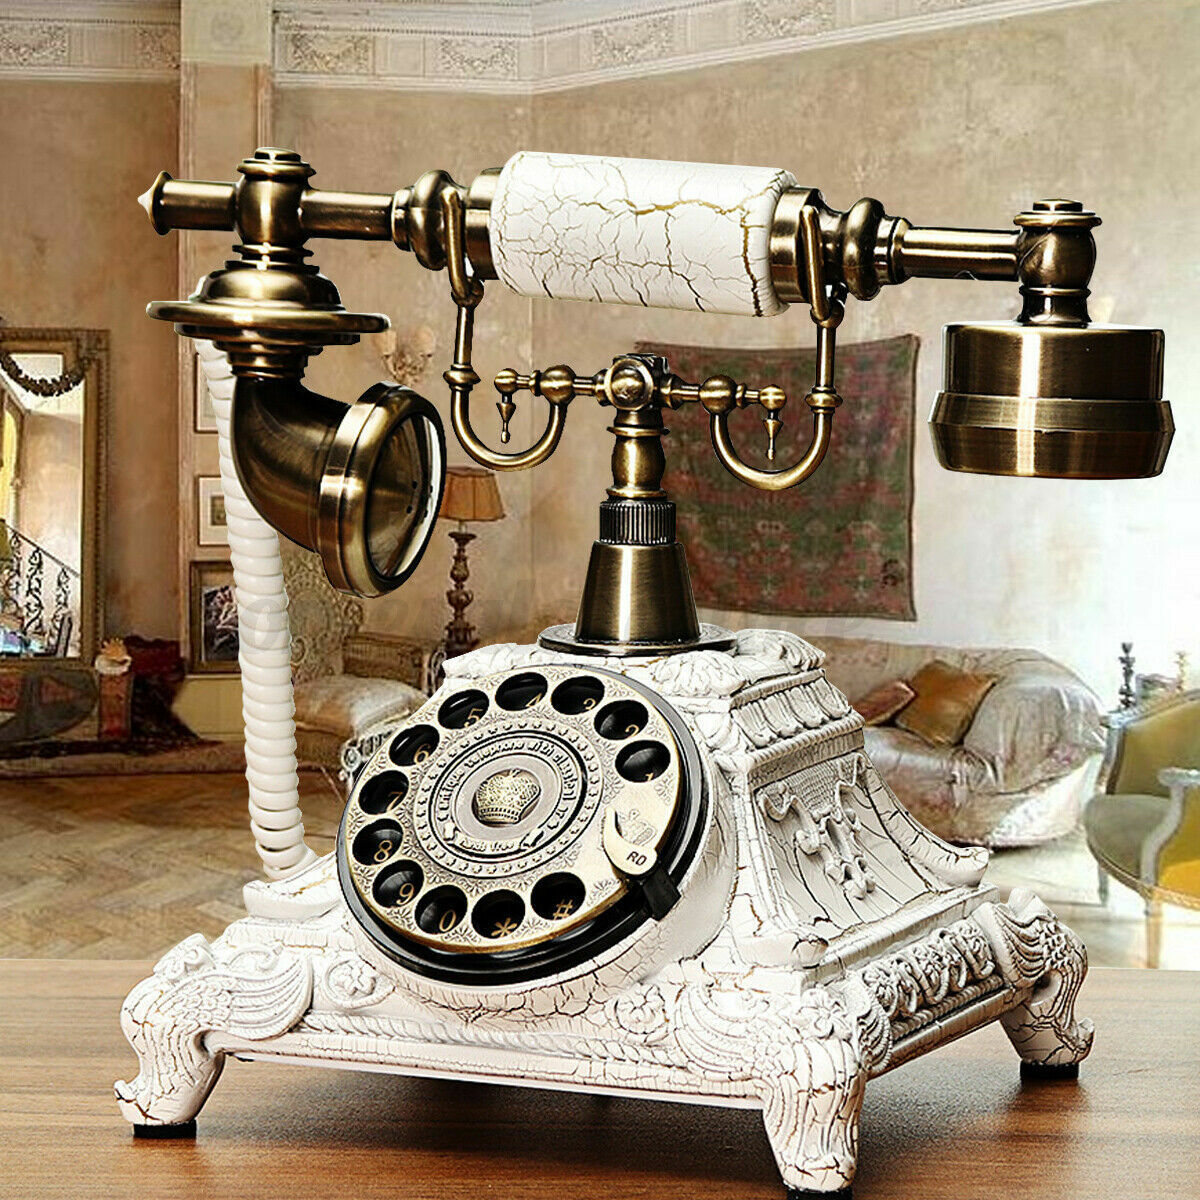 Old Fashioned Telephone Desktop Rotary Phone Antique Style Corded Phone Decor US